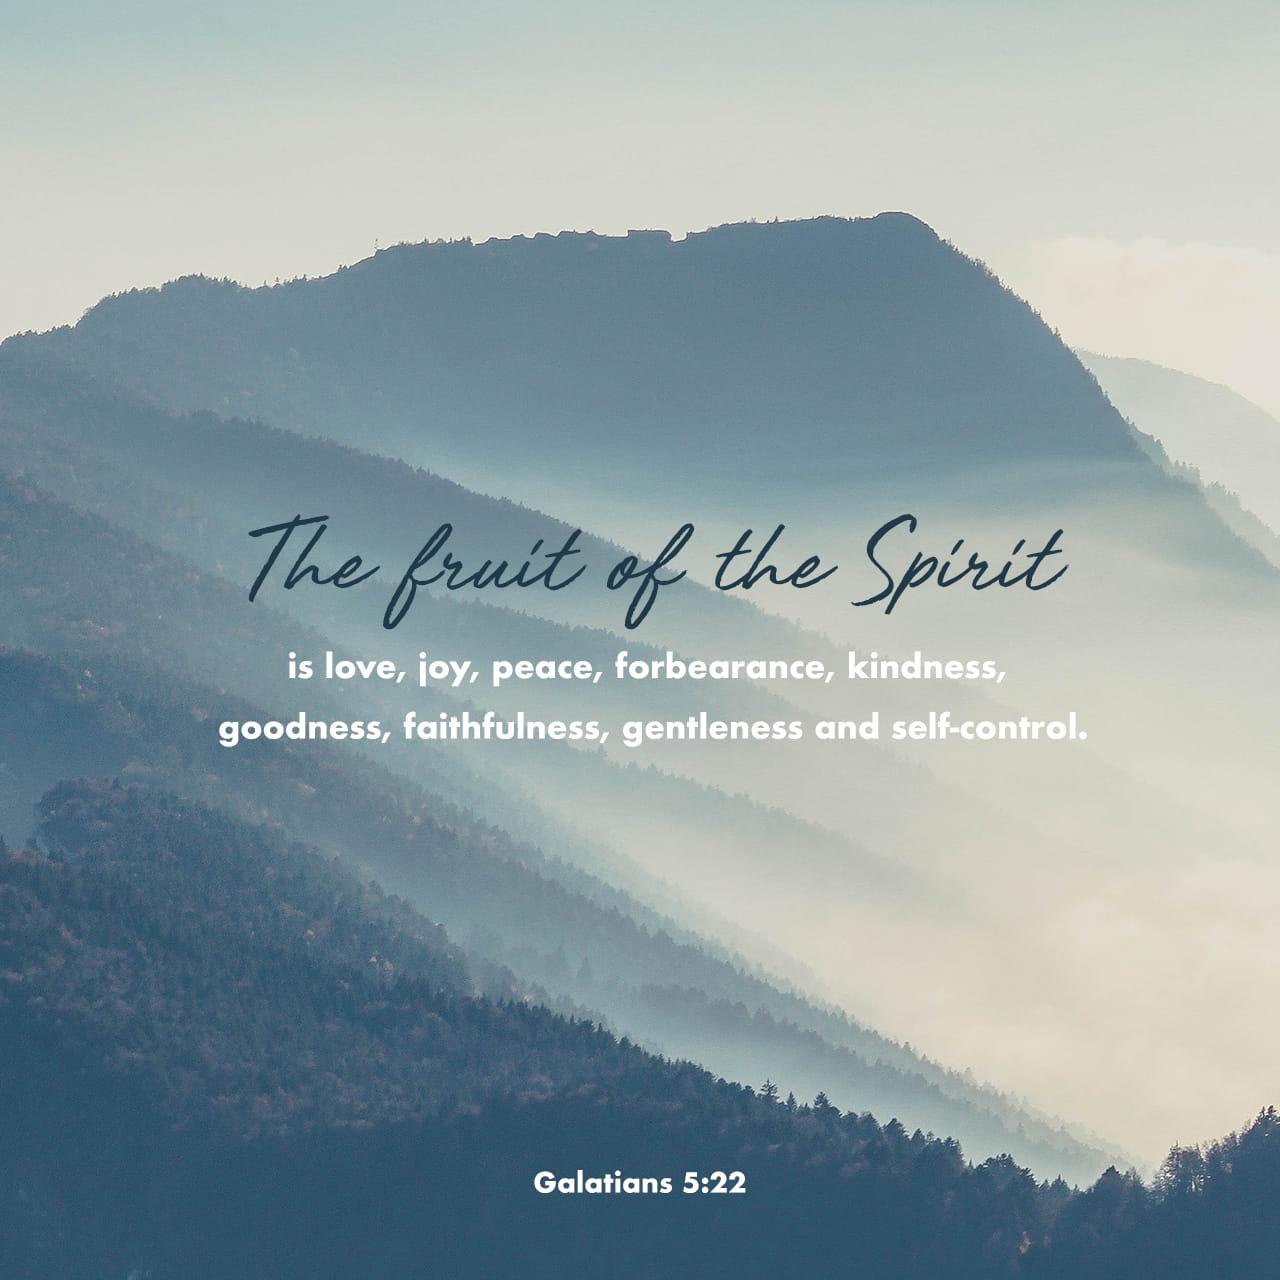 Bible Verse of the Day - day 85 - image 2618 (Galatians 5:22)